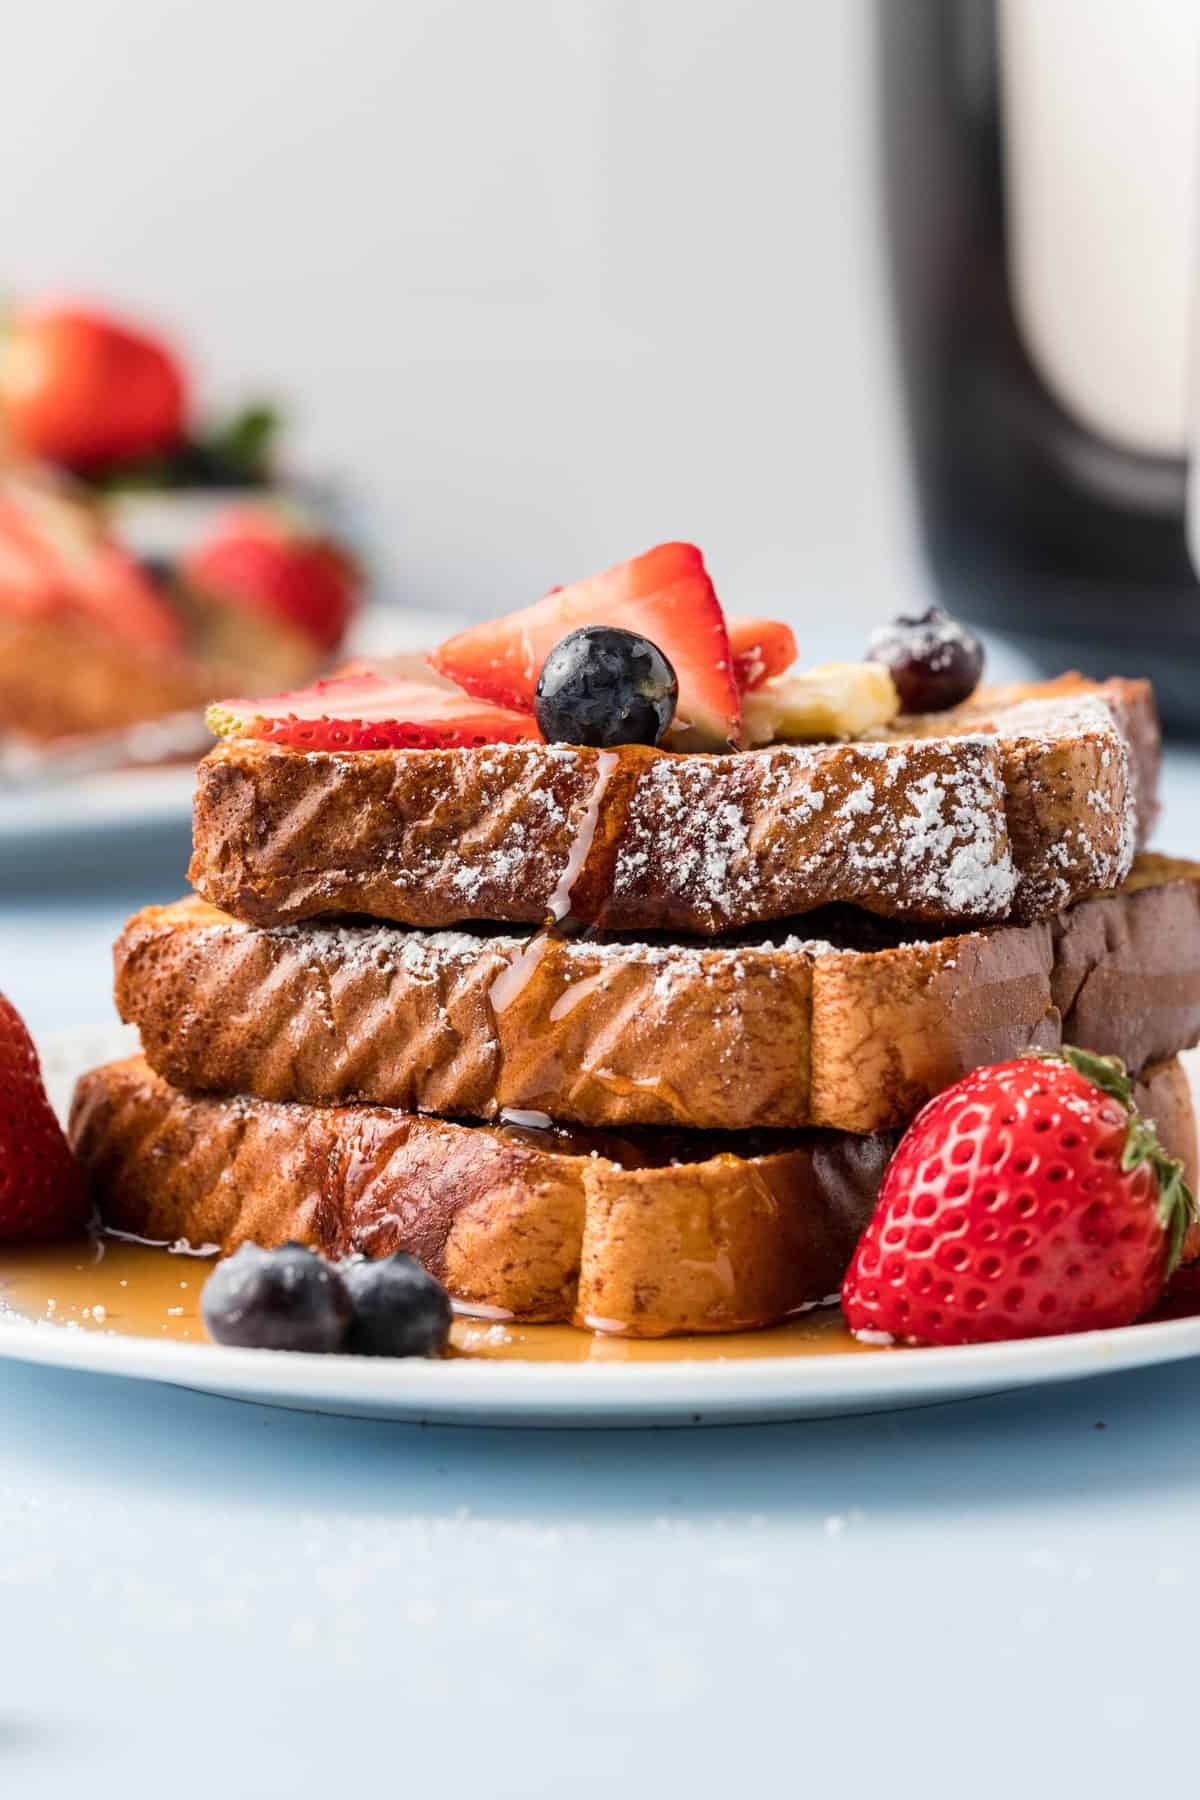 A stack of french toast is topped with syrup and berries on a white plate.